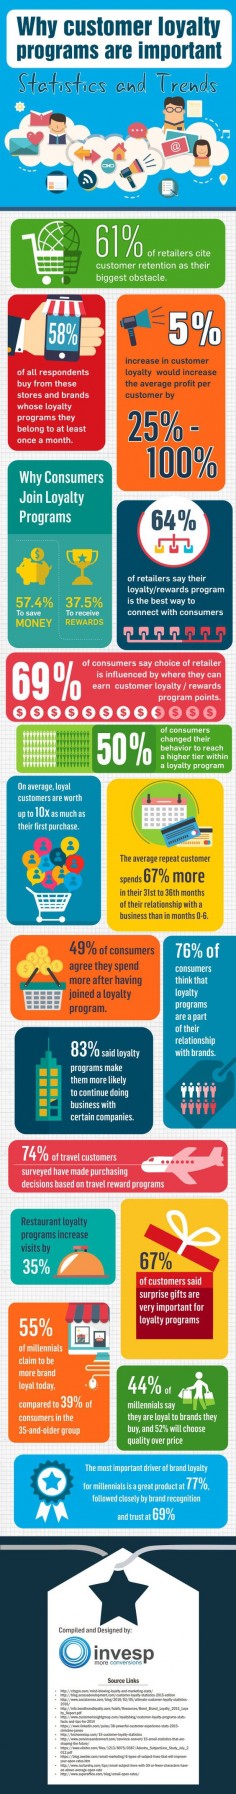 Why Customer Loyalty Programs Are Important For Your Business [Infographic]